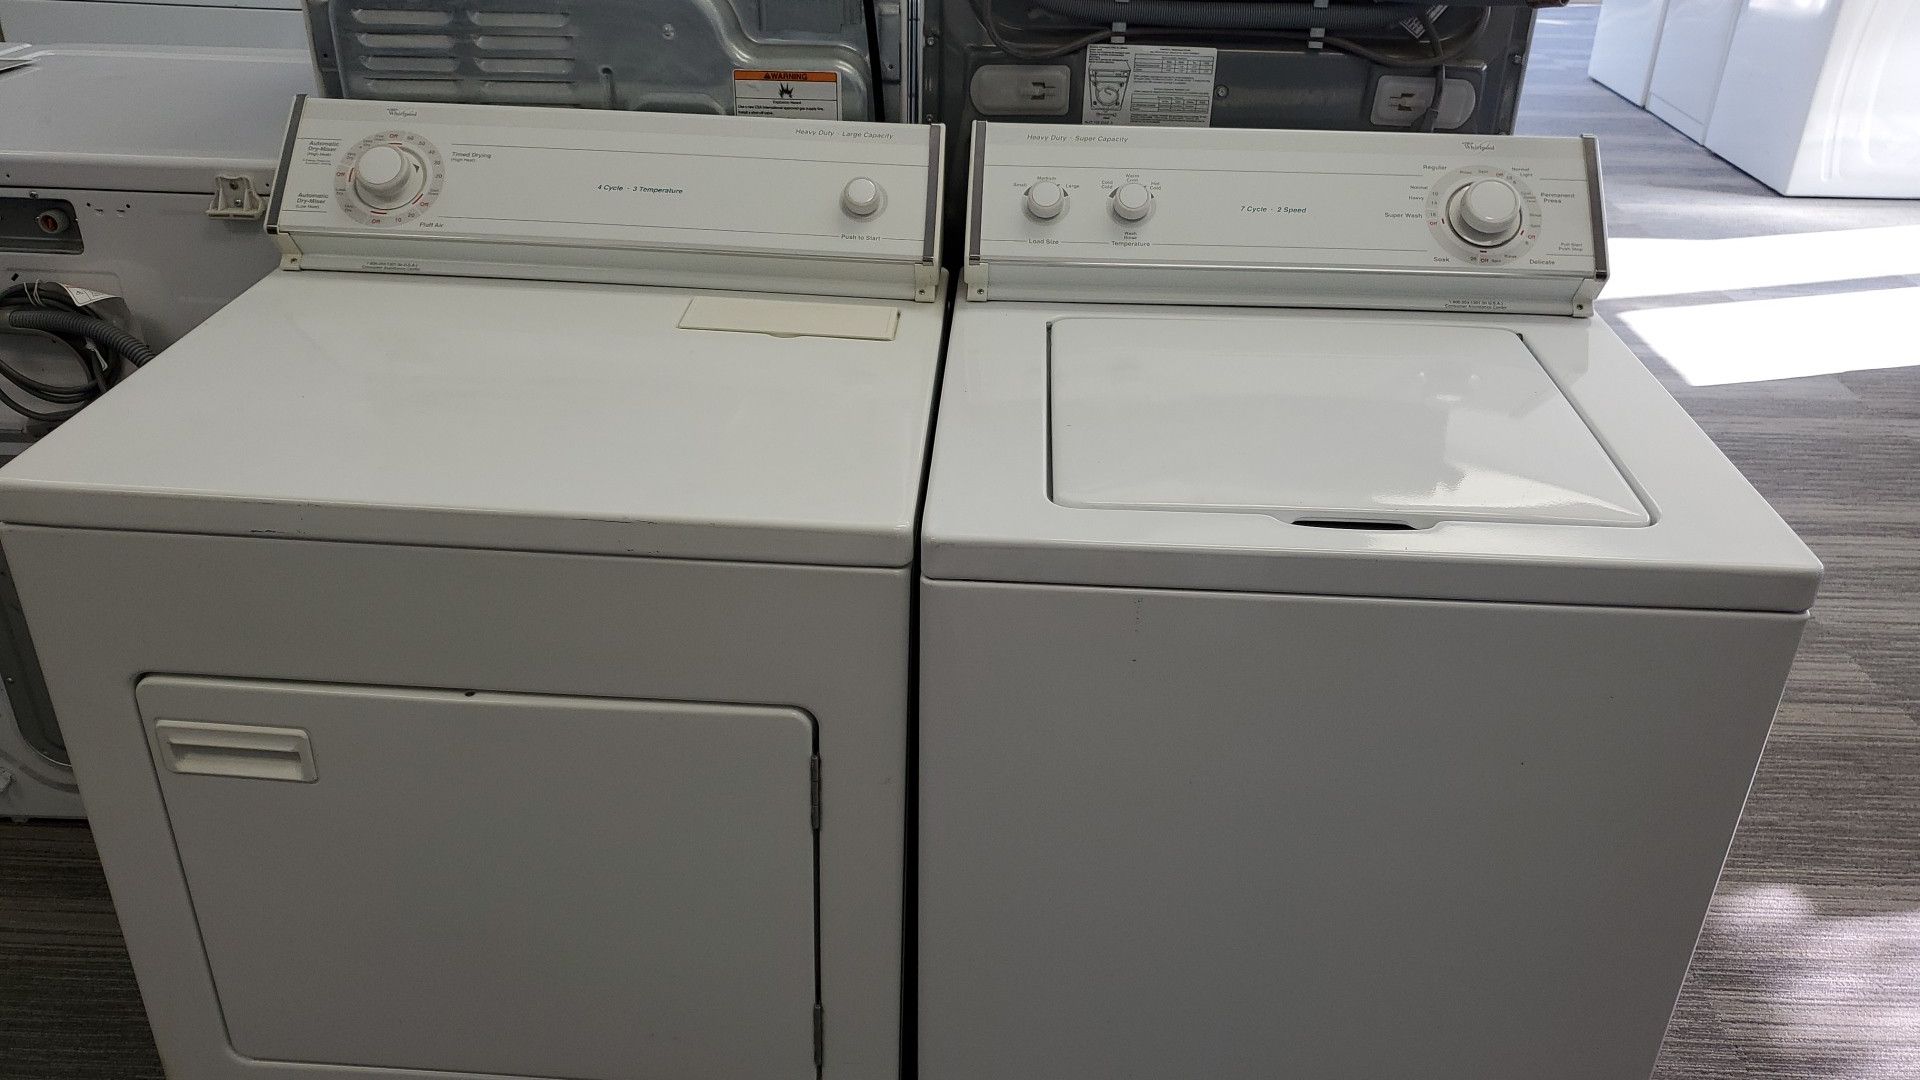 Whirlpool Washer and Electric Dryer Set - warranty included